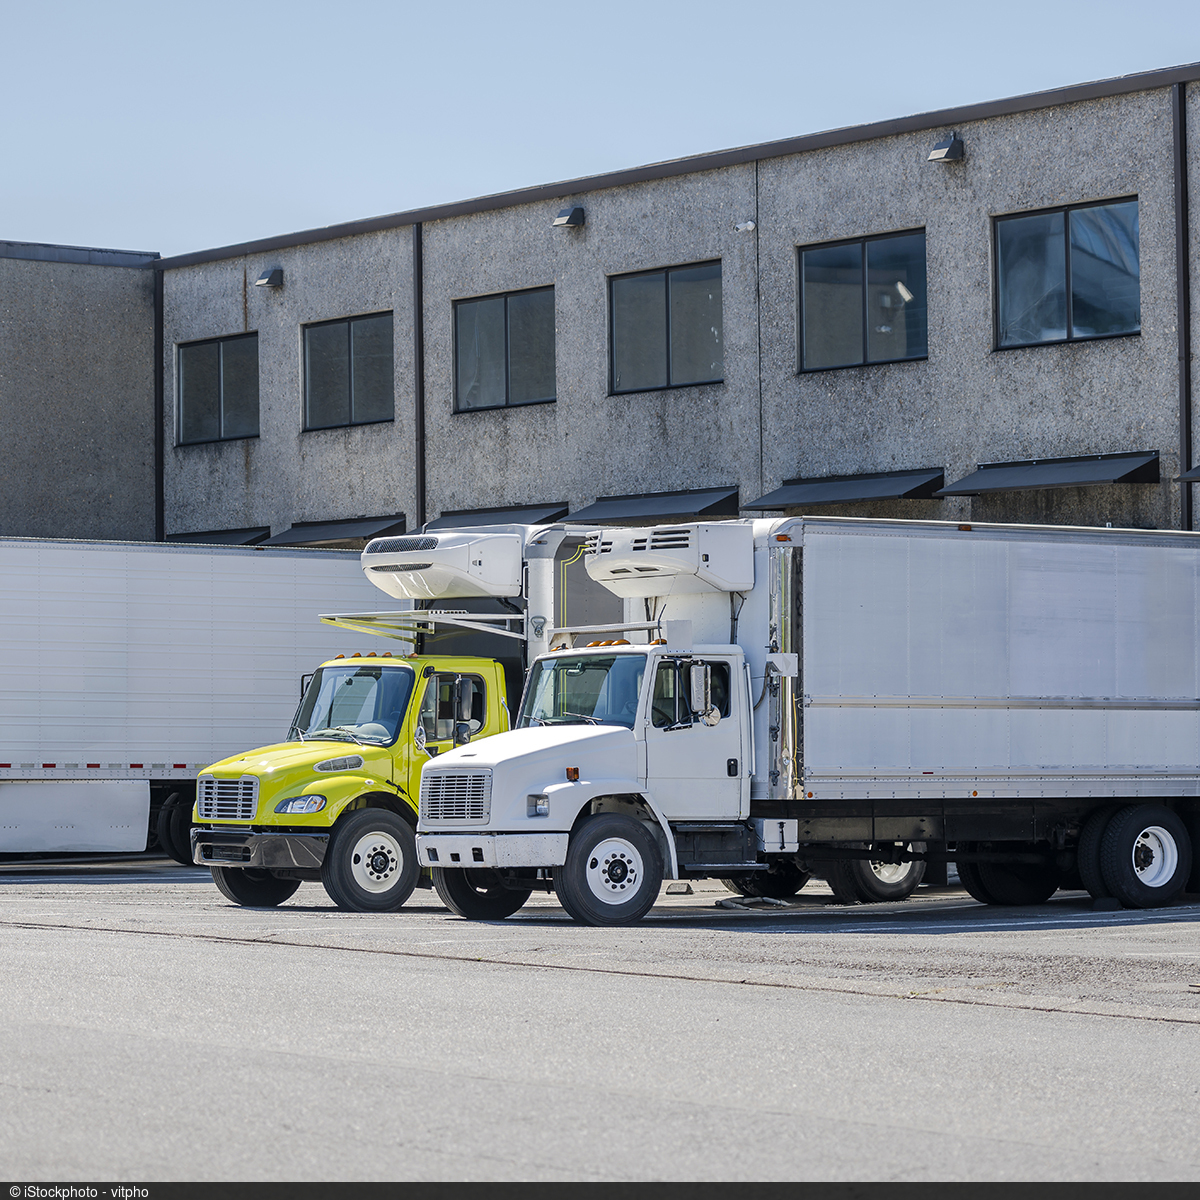 Picture of a large warehouse with truck ramps in front of which several trucks are docked